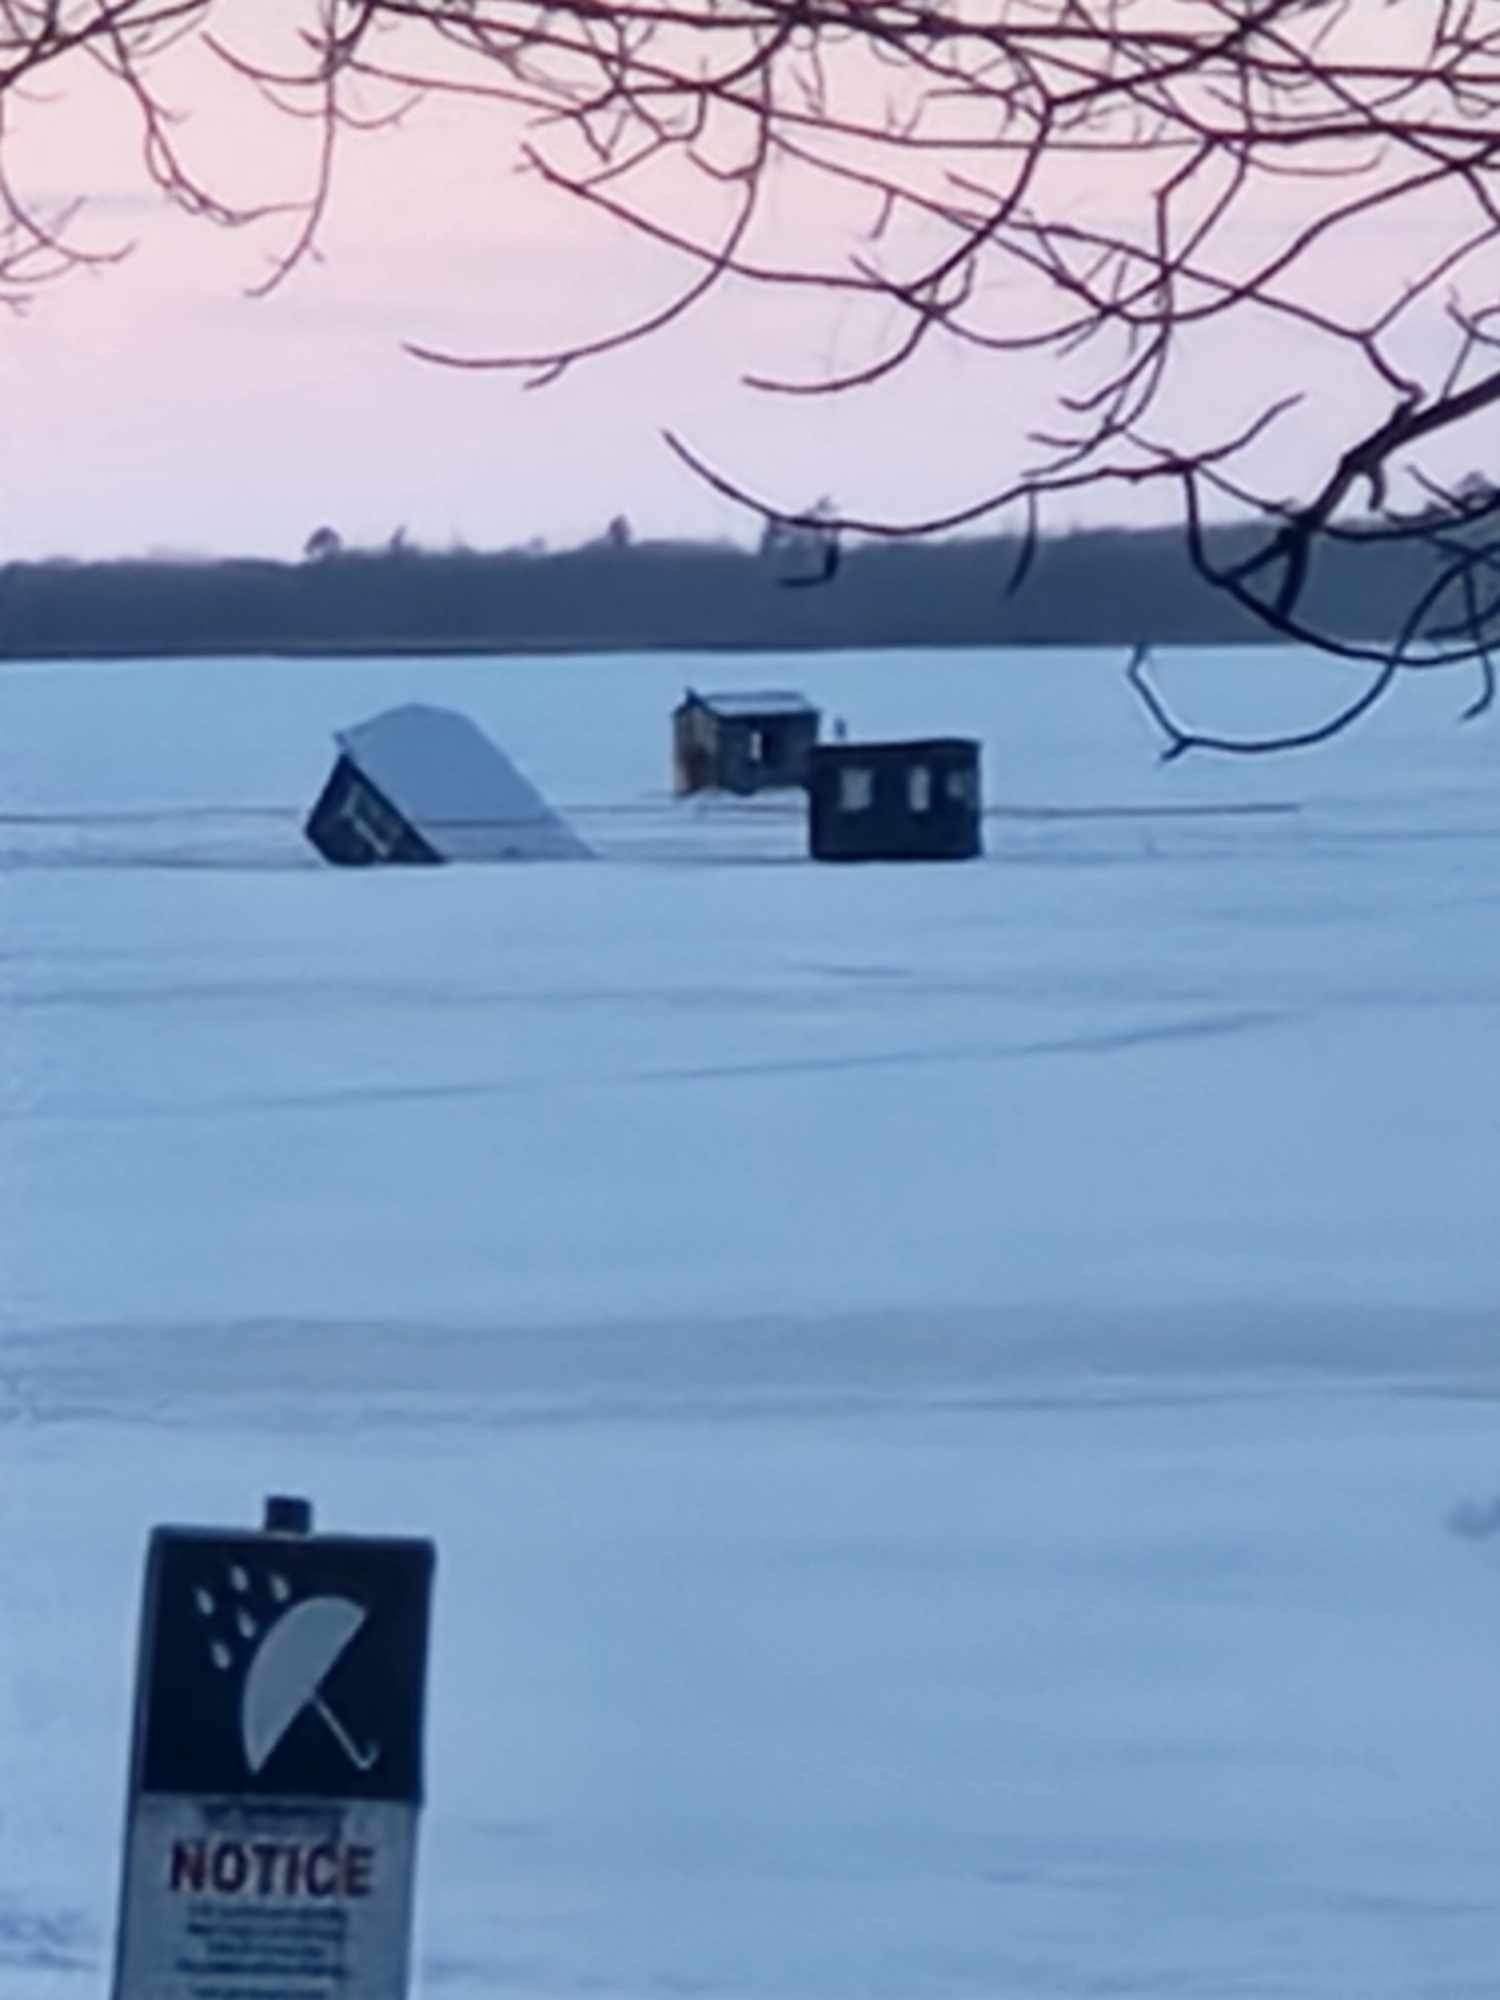 Gather 'round the hole! It's ice fishing time!  Bartell's Backroads ⋅ The  Ice Fishing Newsletter